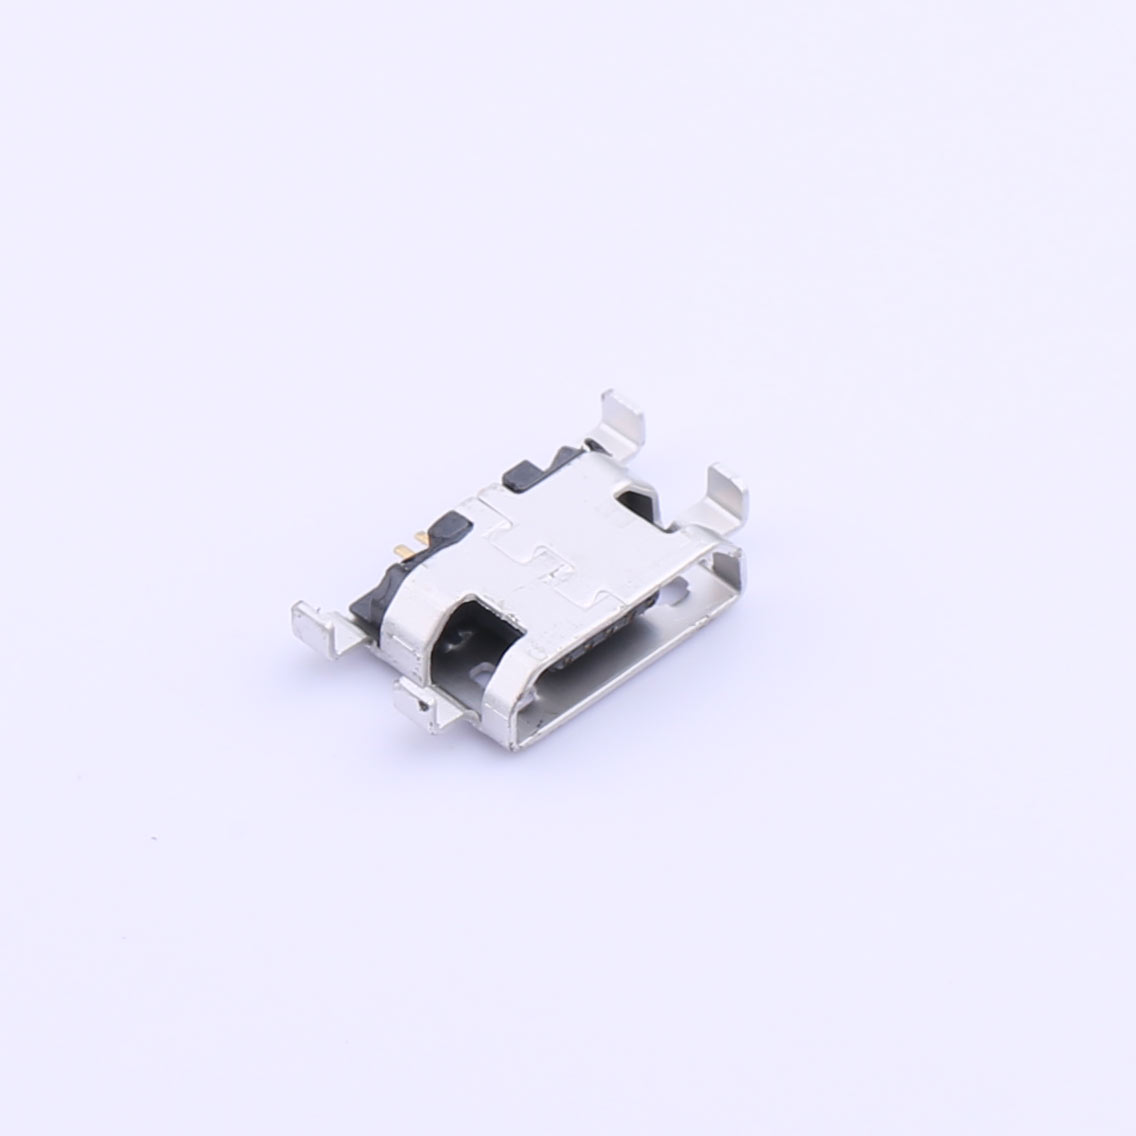 Kinghelm USB Micro-B Connector Female 4 Pin Interface Port Jack usb type-a connector